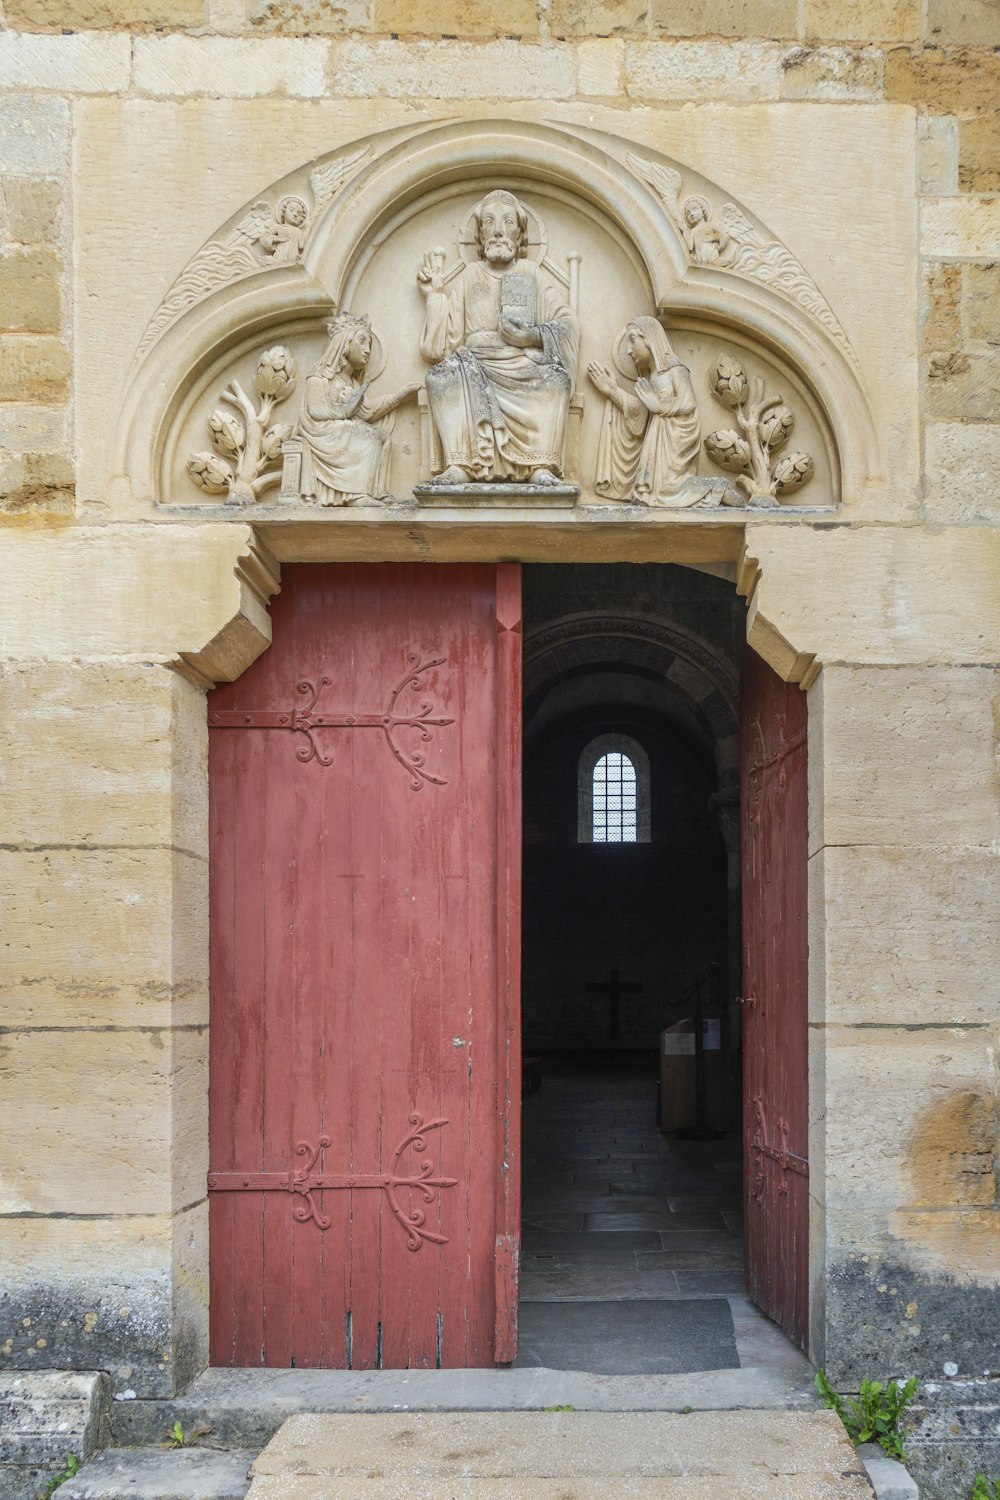 a door with statues on it